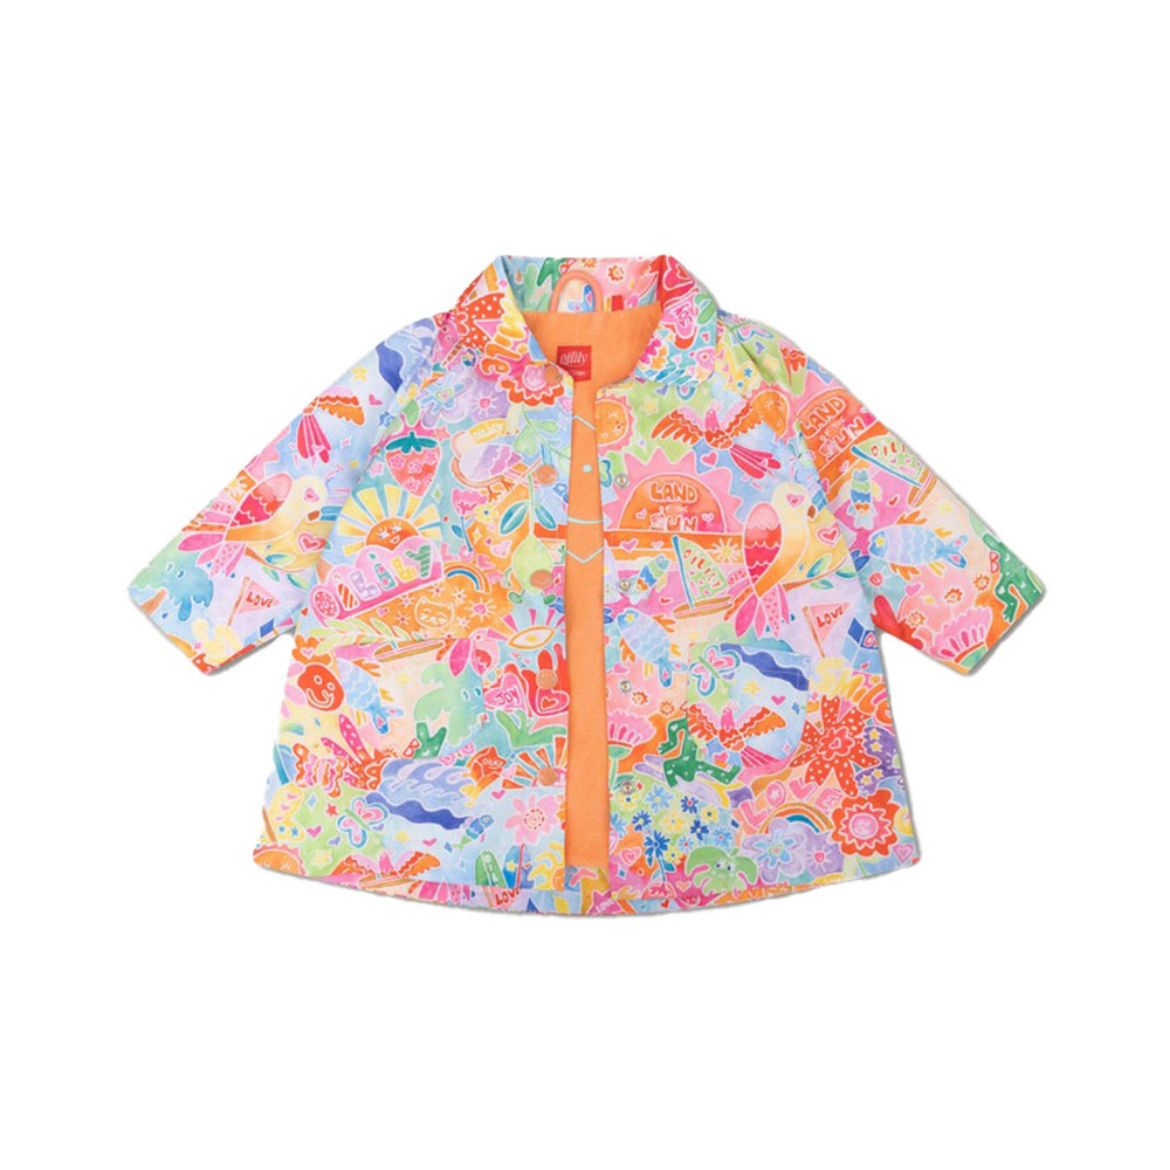 Picture of Oilily Girls Chupa Pink Sun Printed Jacket